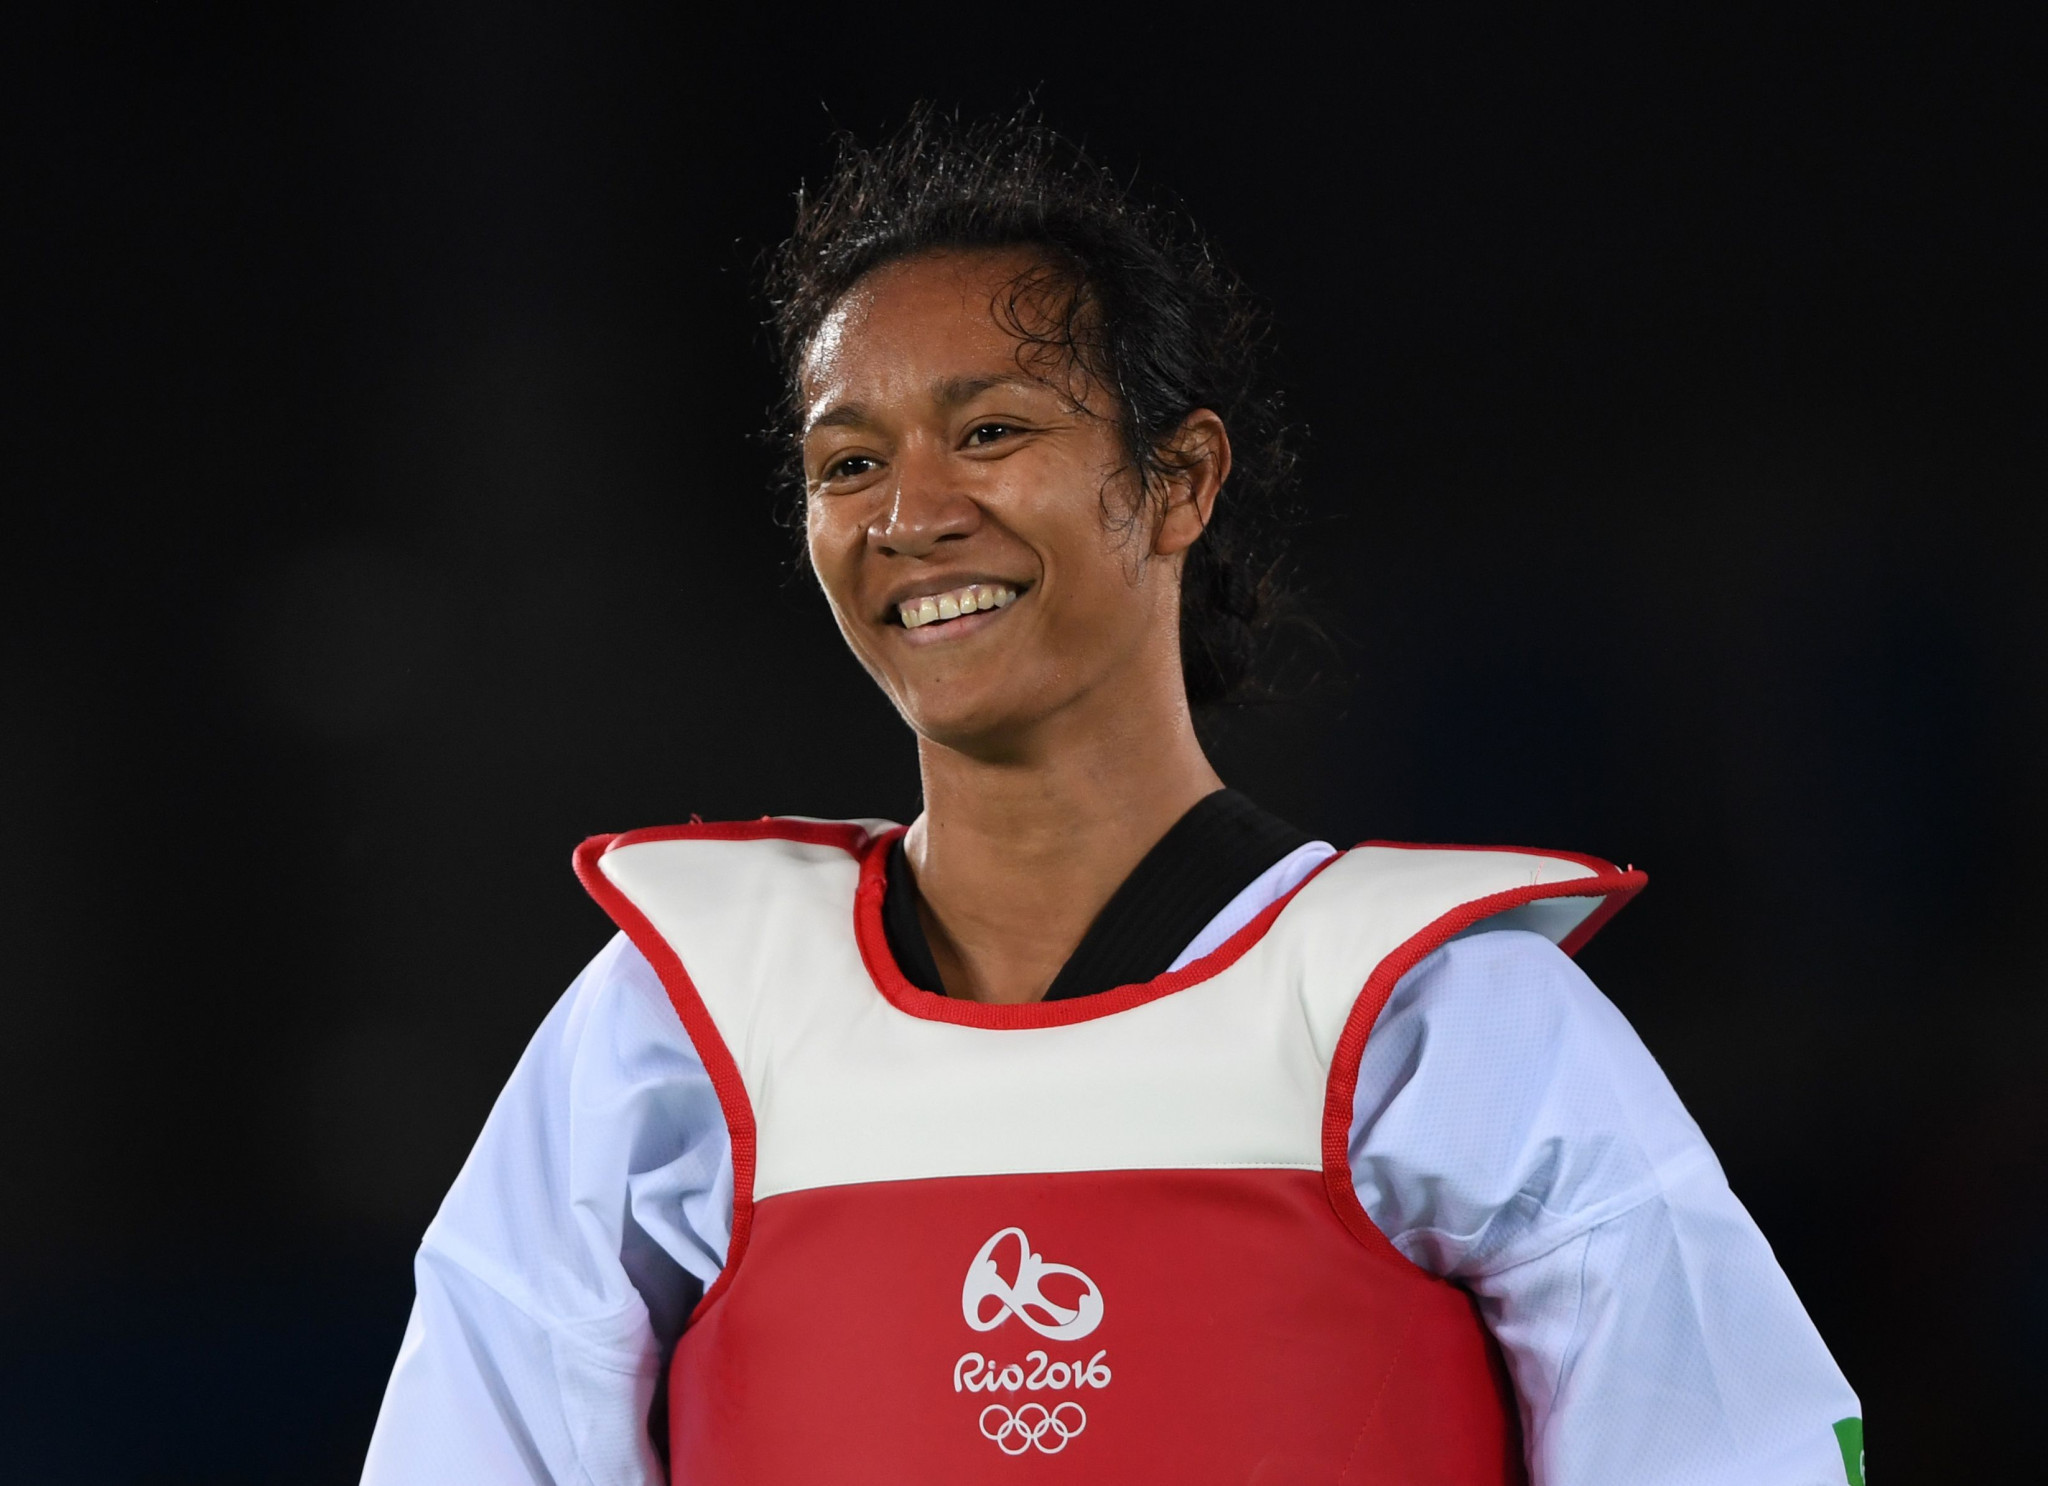 Papua New Guinea athlete Samantha Kassman lost in the first round at the 2016 Olympic Games in Rio de Janeiro ©Getty Images